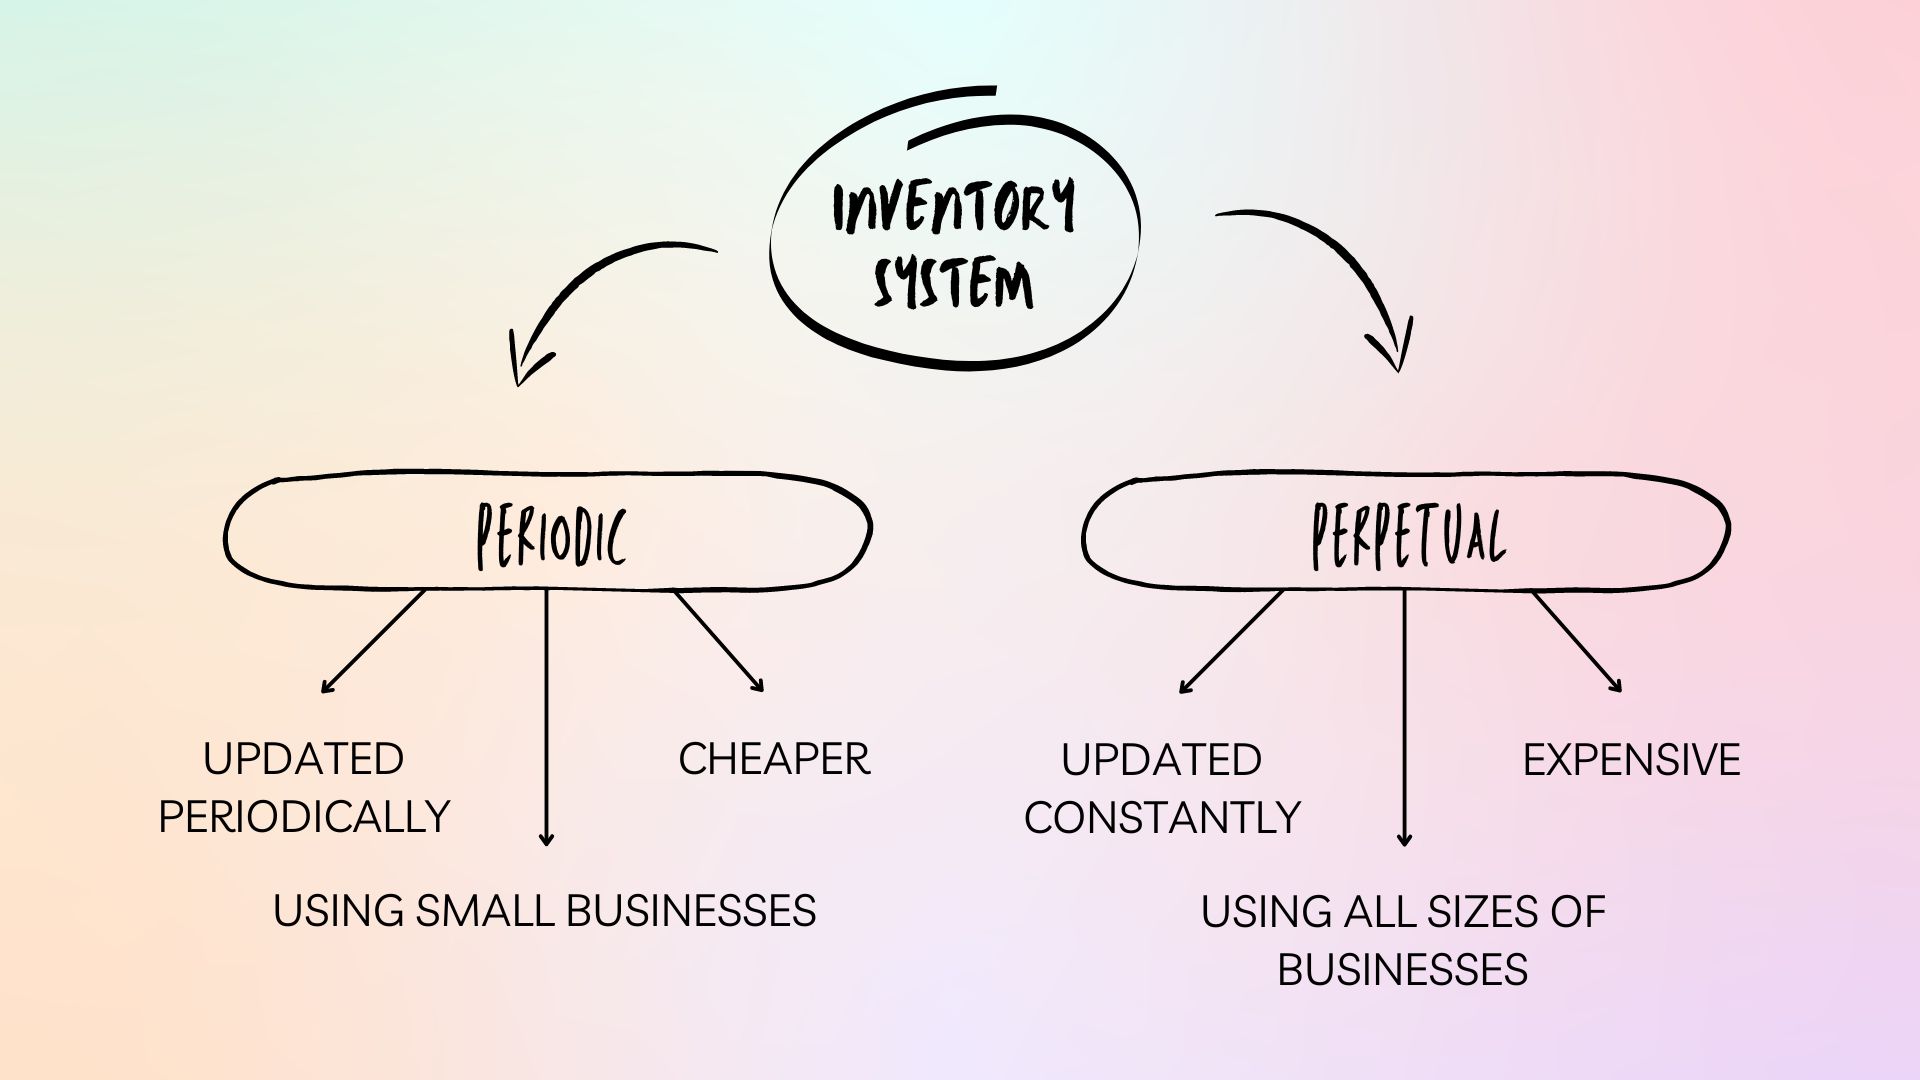 Periodic vs Perpetual Inventory System Definition, Differences